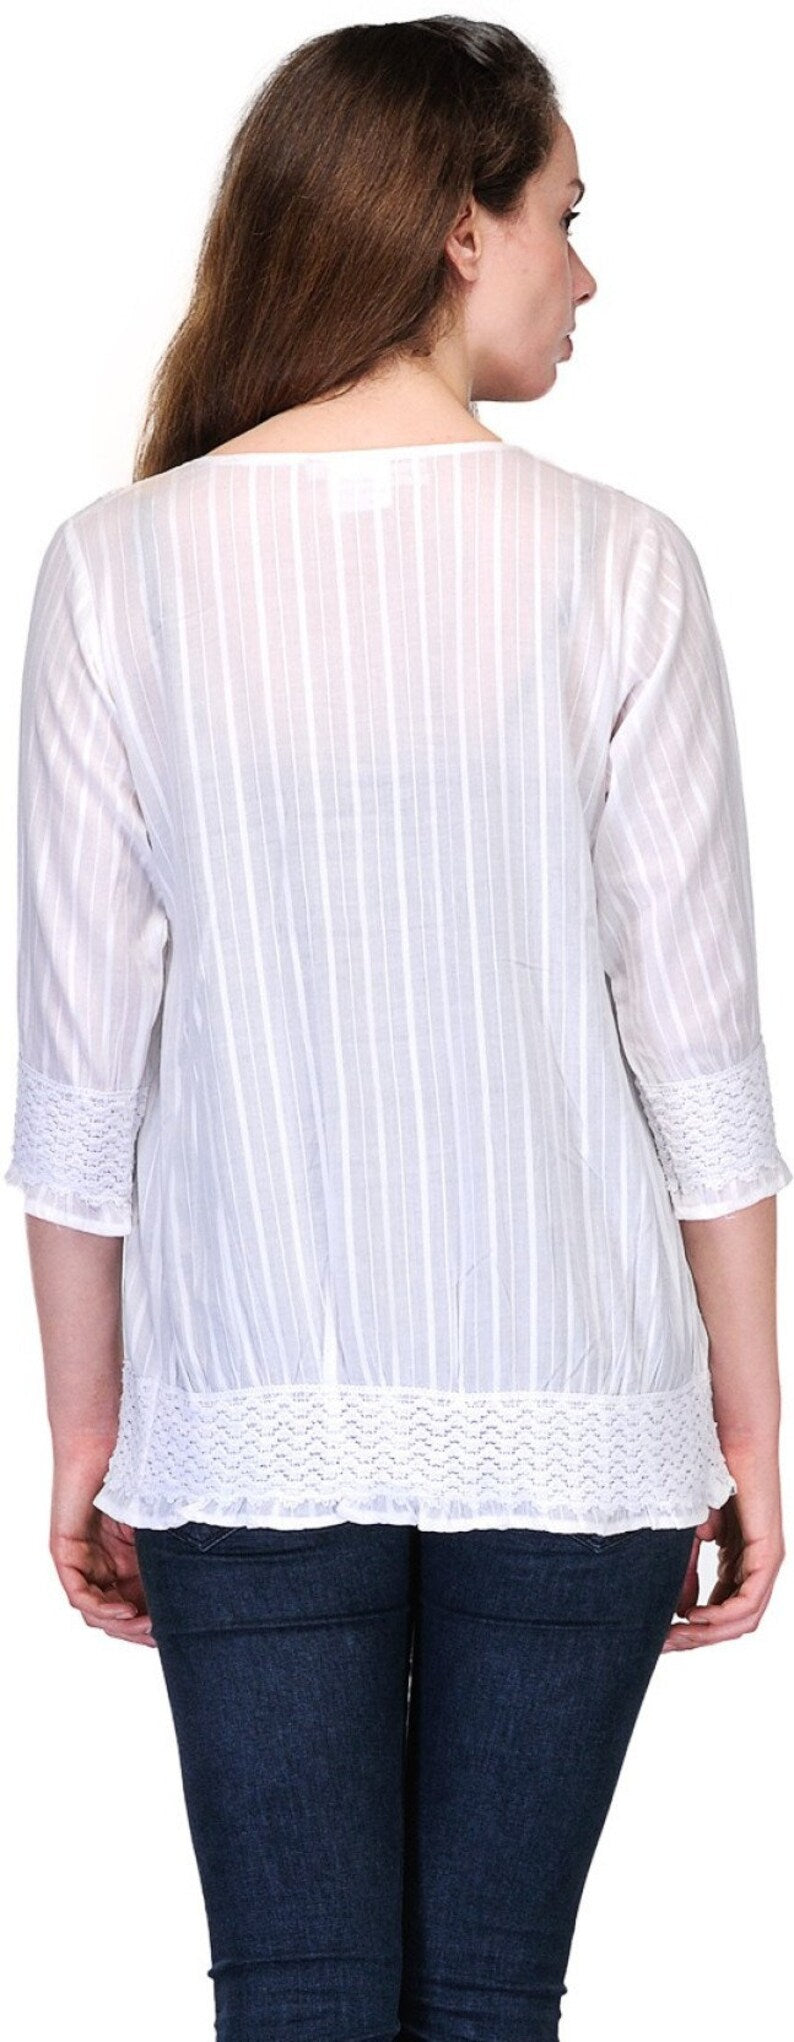 White Cotton Lace Top For Women , Chest 38 Inches  , FREE  DELIVERY